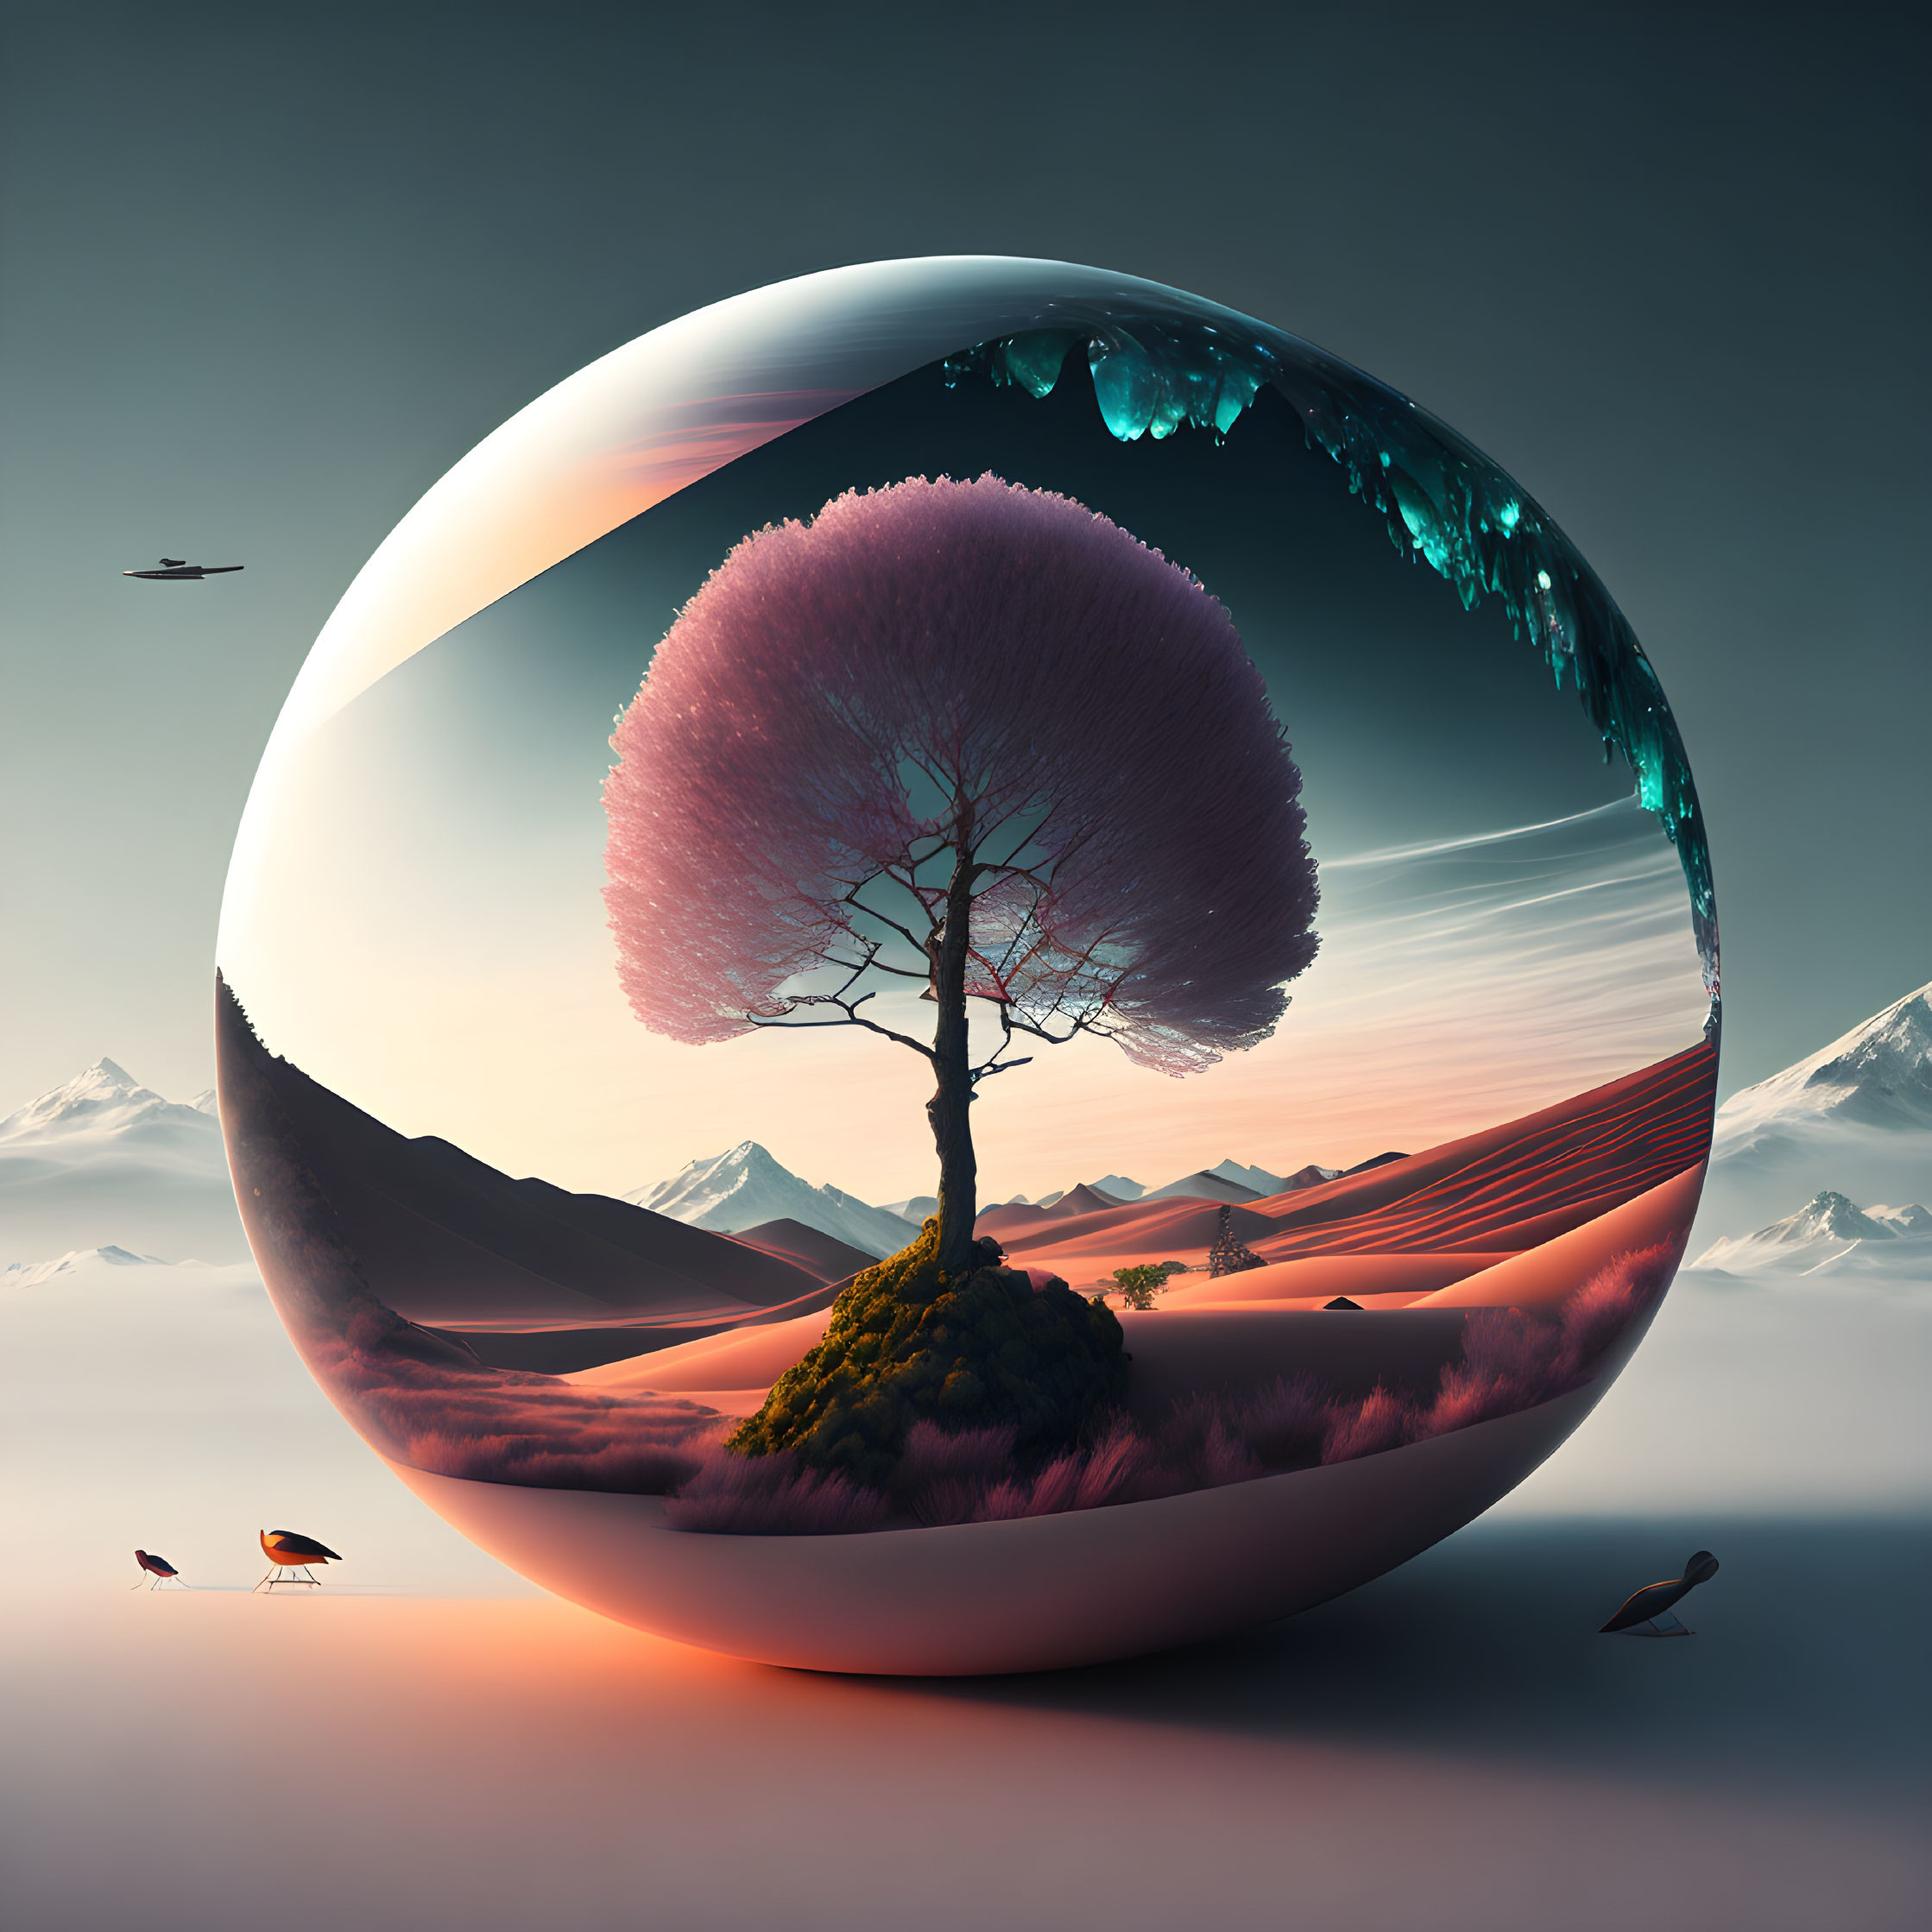 Surreal landscape with tree in sphere, reflecting alternate reality against mountains, sand dunes, and